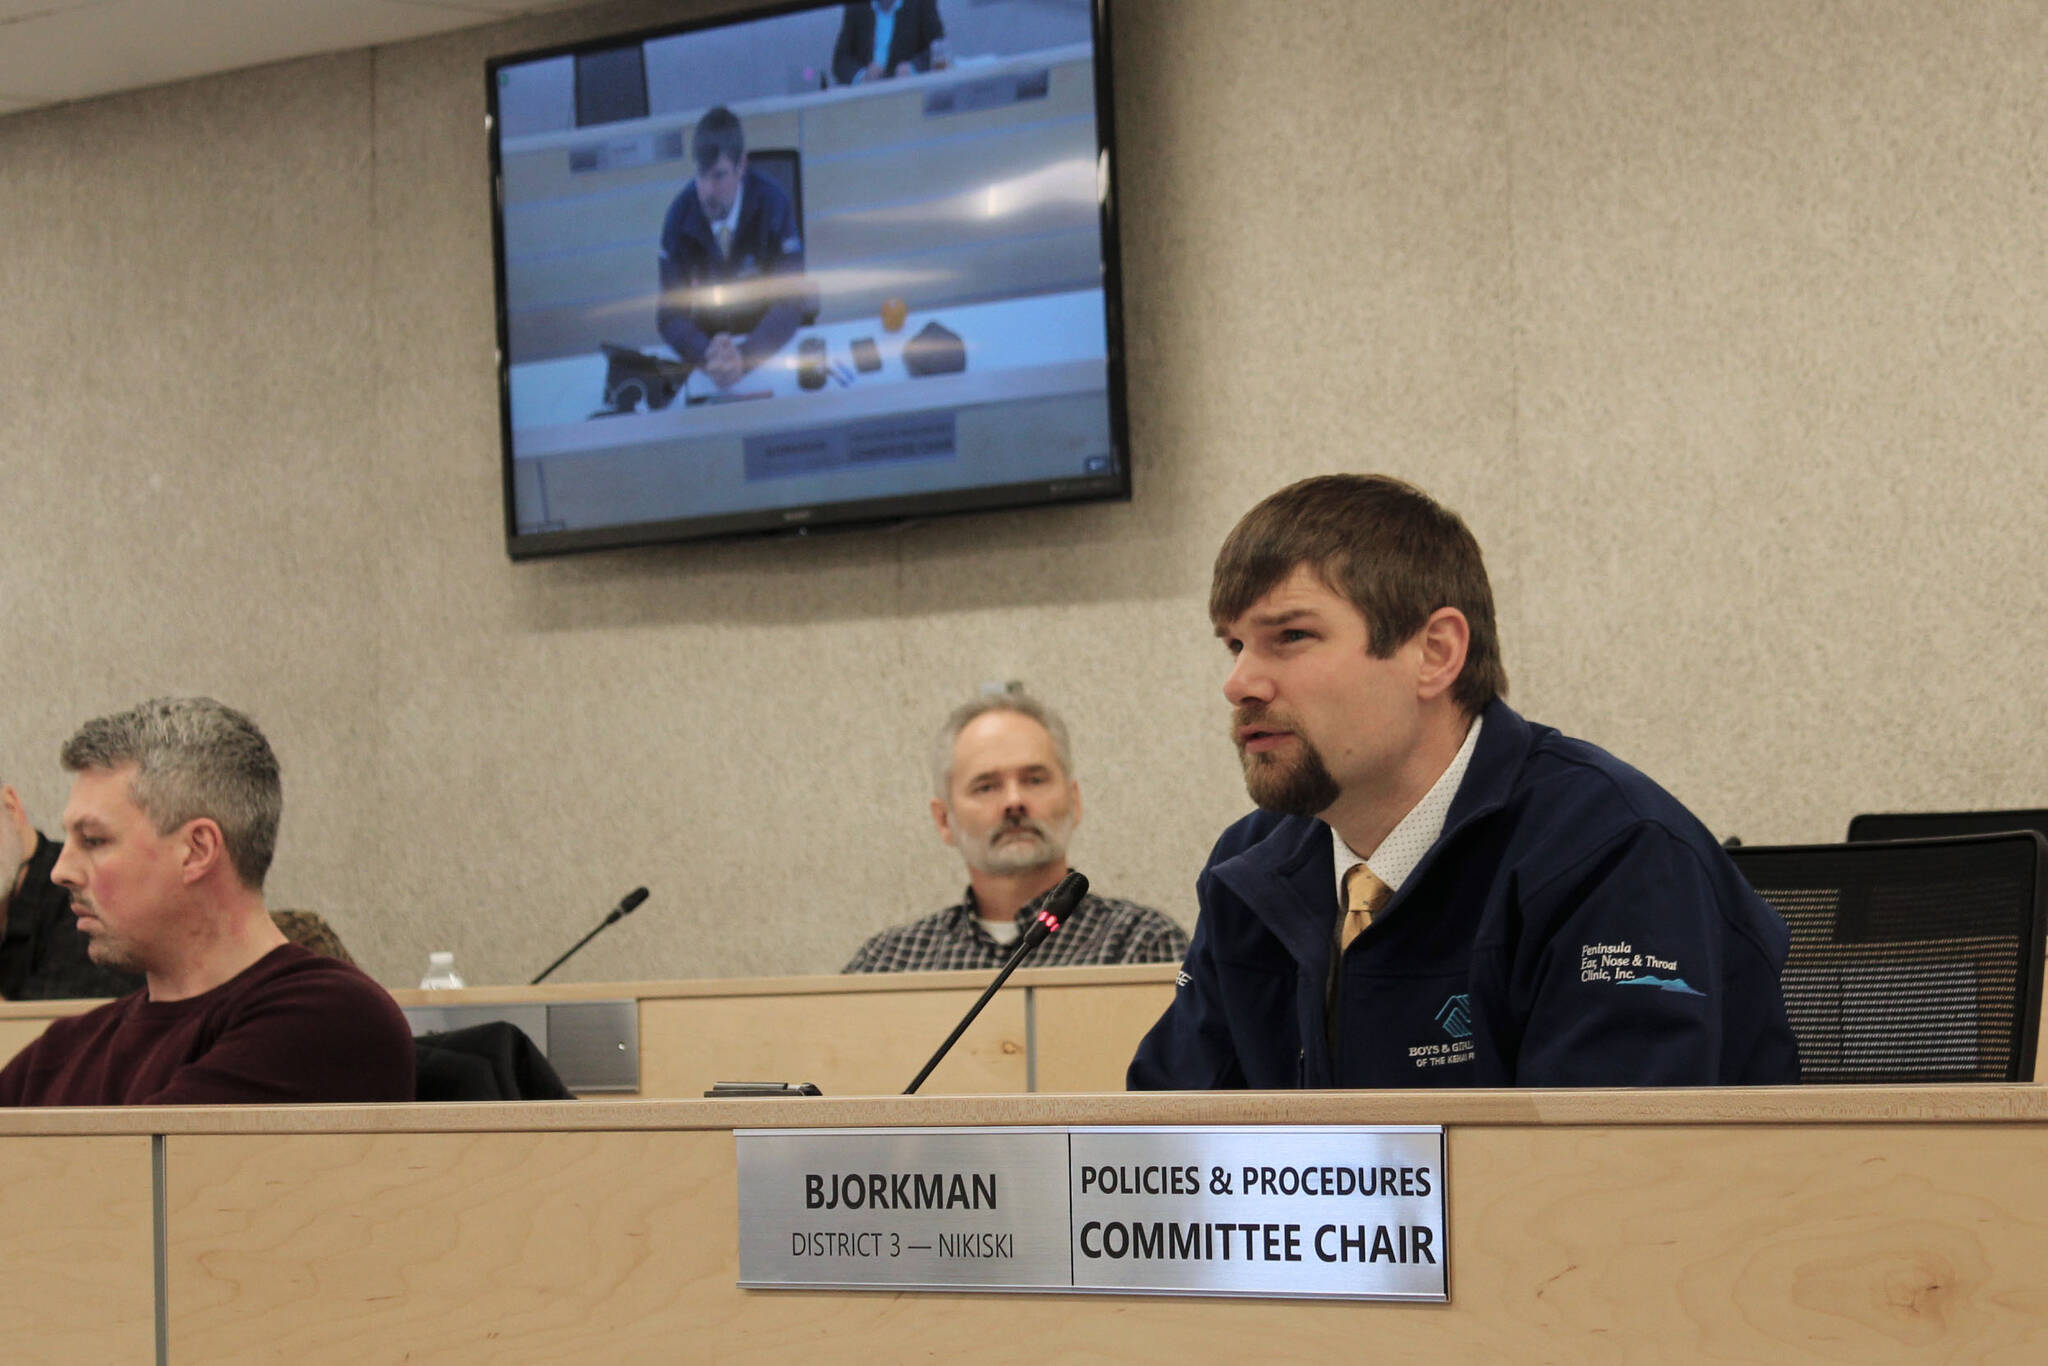 Jesse Bjorkman speaks at a borough work session on Tuesday, March 2, 2021, in Soldotna, Alaska. Bjorkman, who has held the seat since 2019, was elected to the Alaska Senate last year. (Photo by Ashlyn O’Hara/Peninsula Clarion)